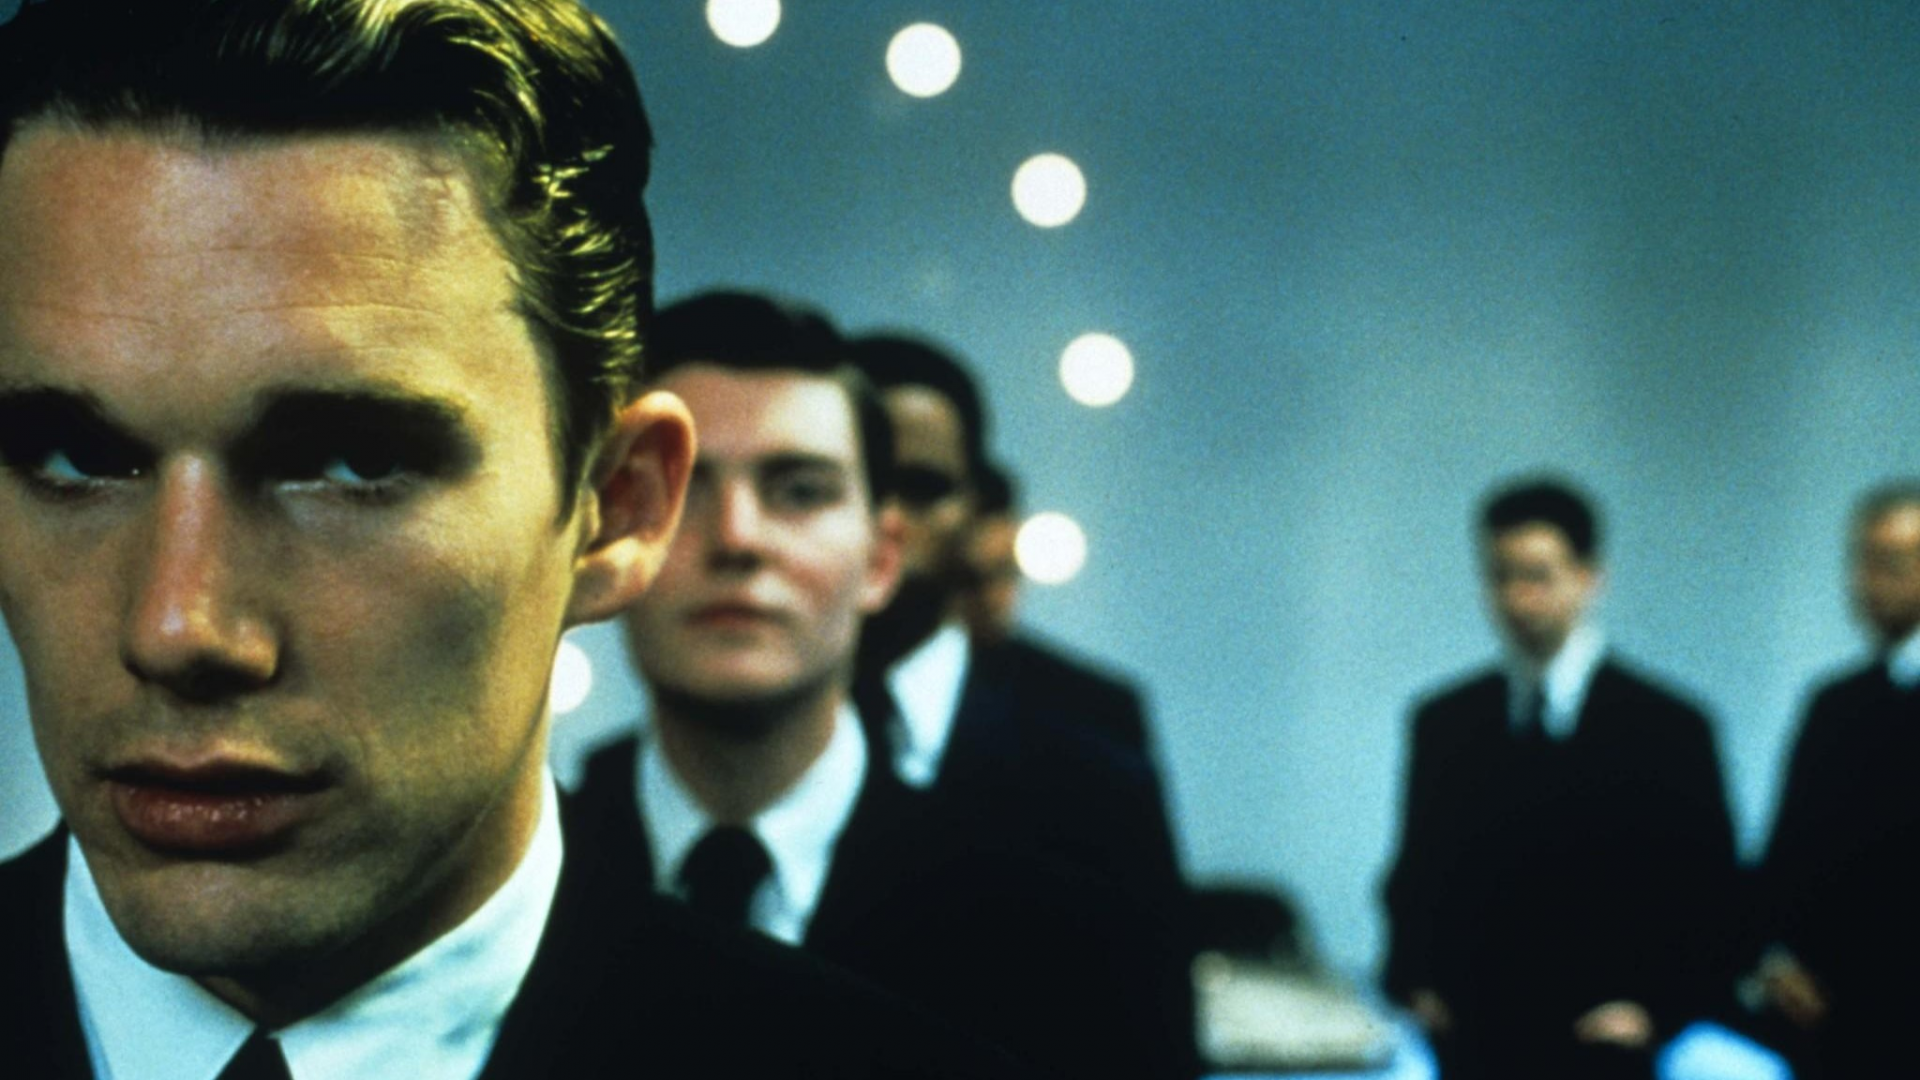 Film still from 'Gattaca'. Men dressed in suits in a stark room, one in the foreground with an ominous expression on his face.